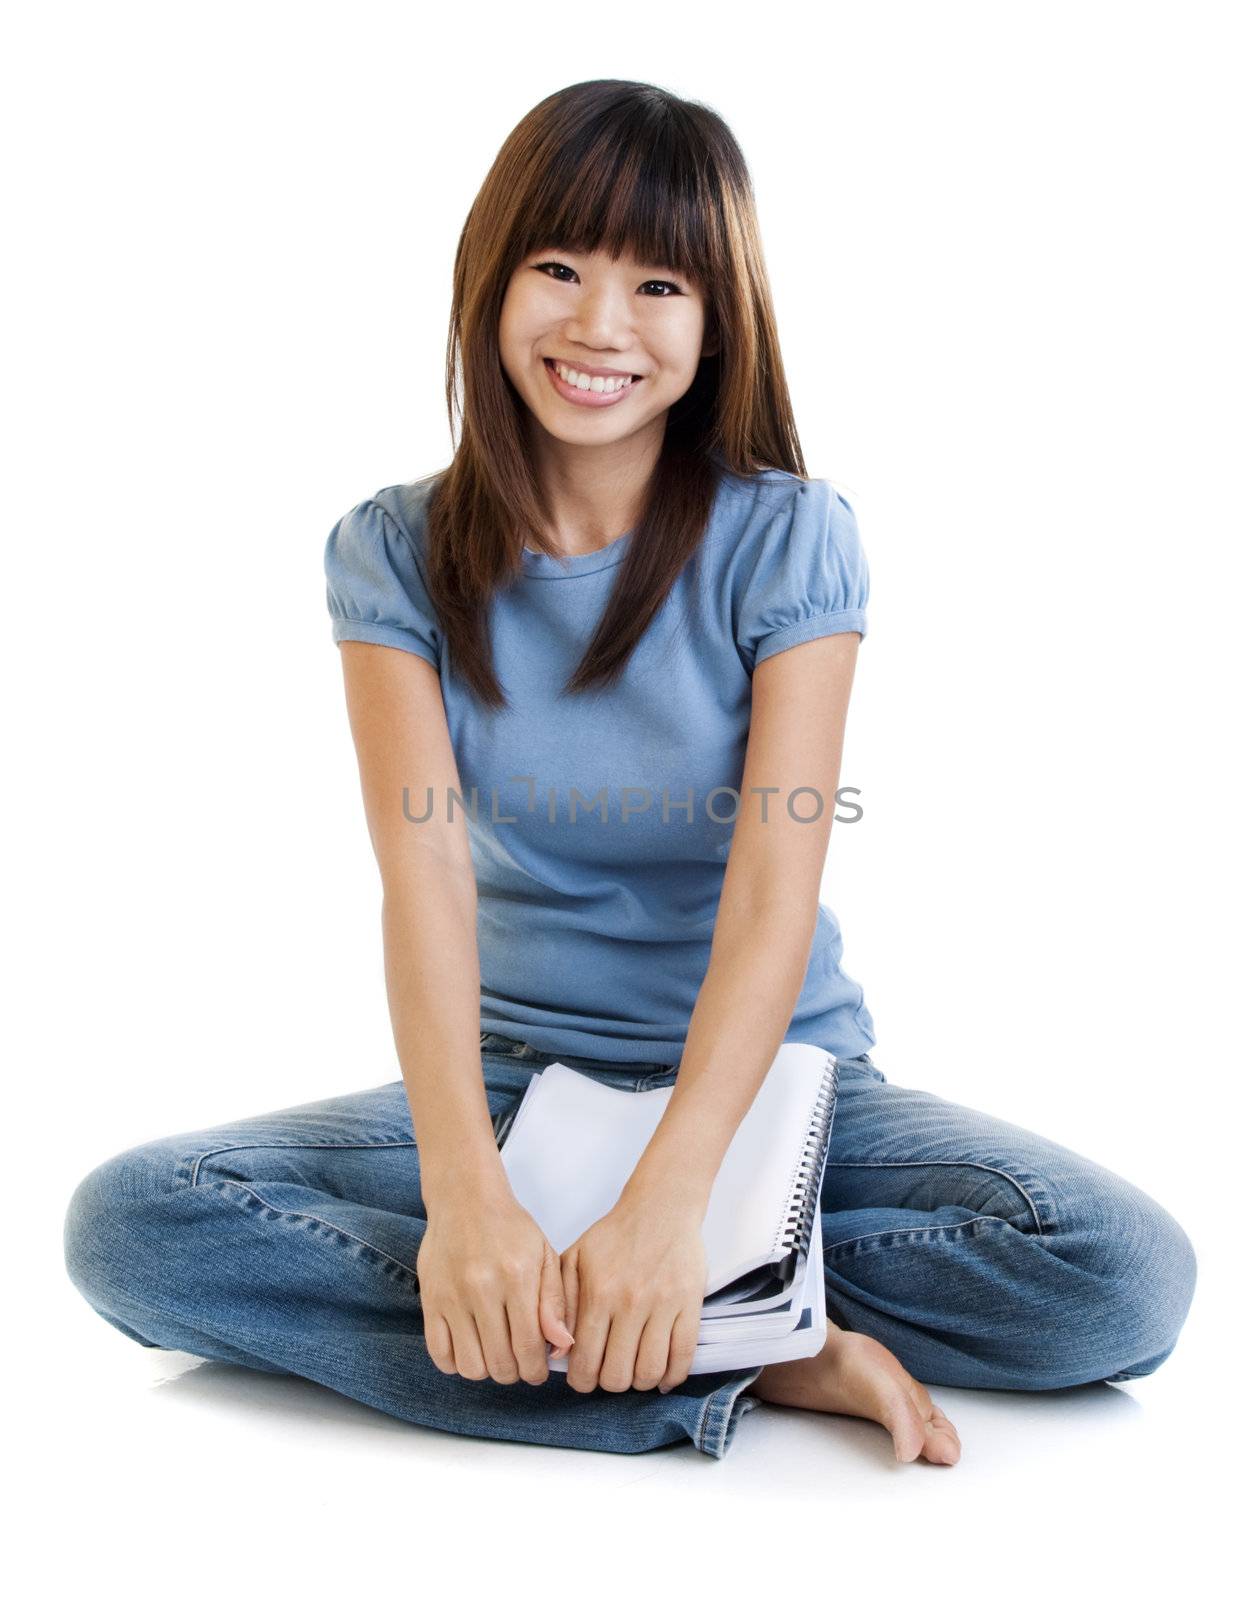 Asian student sitting on floor, with cheerful expression.